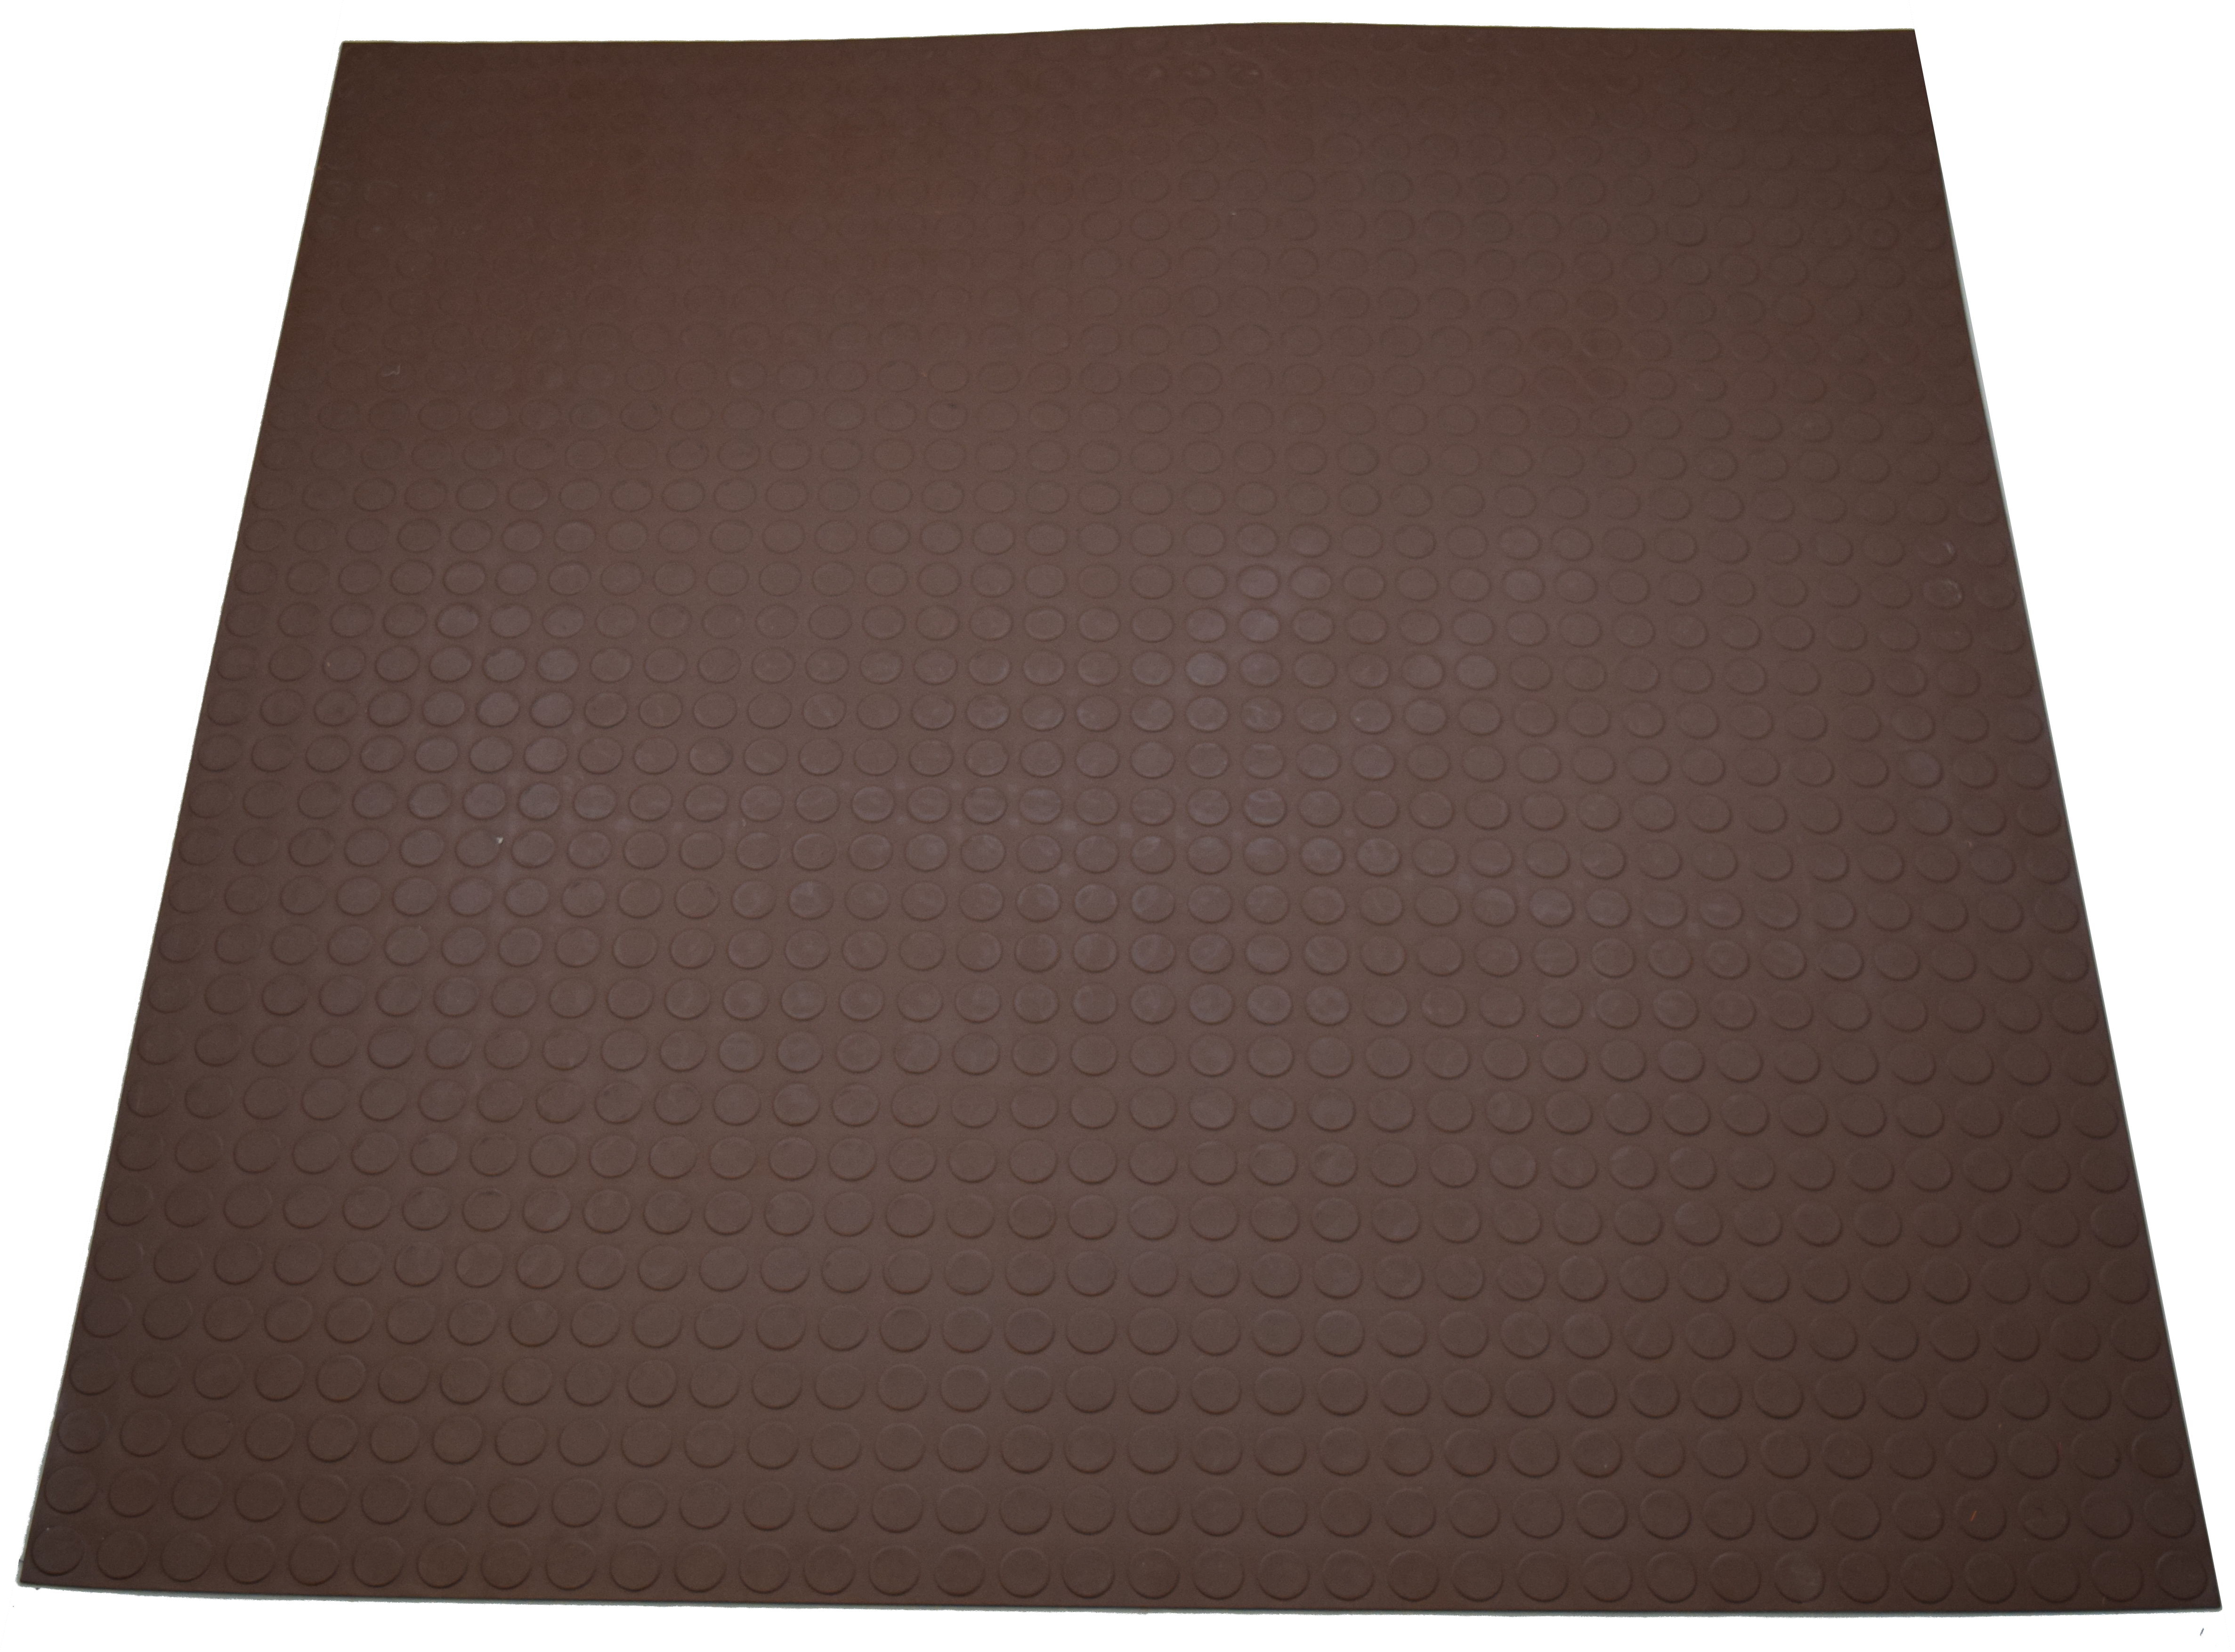 Black Opus Round Studded Indoor Highest Quality Rubber Tiles 1m x1m 3mm £27.99m² 